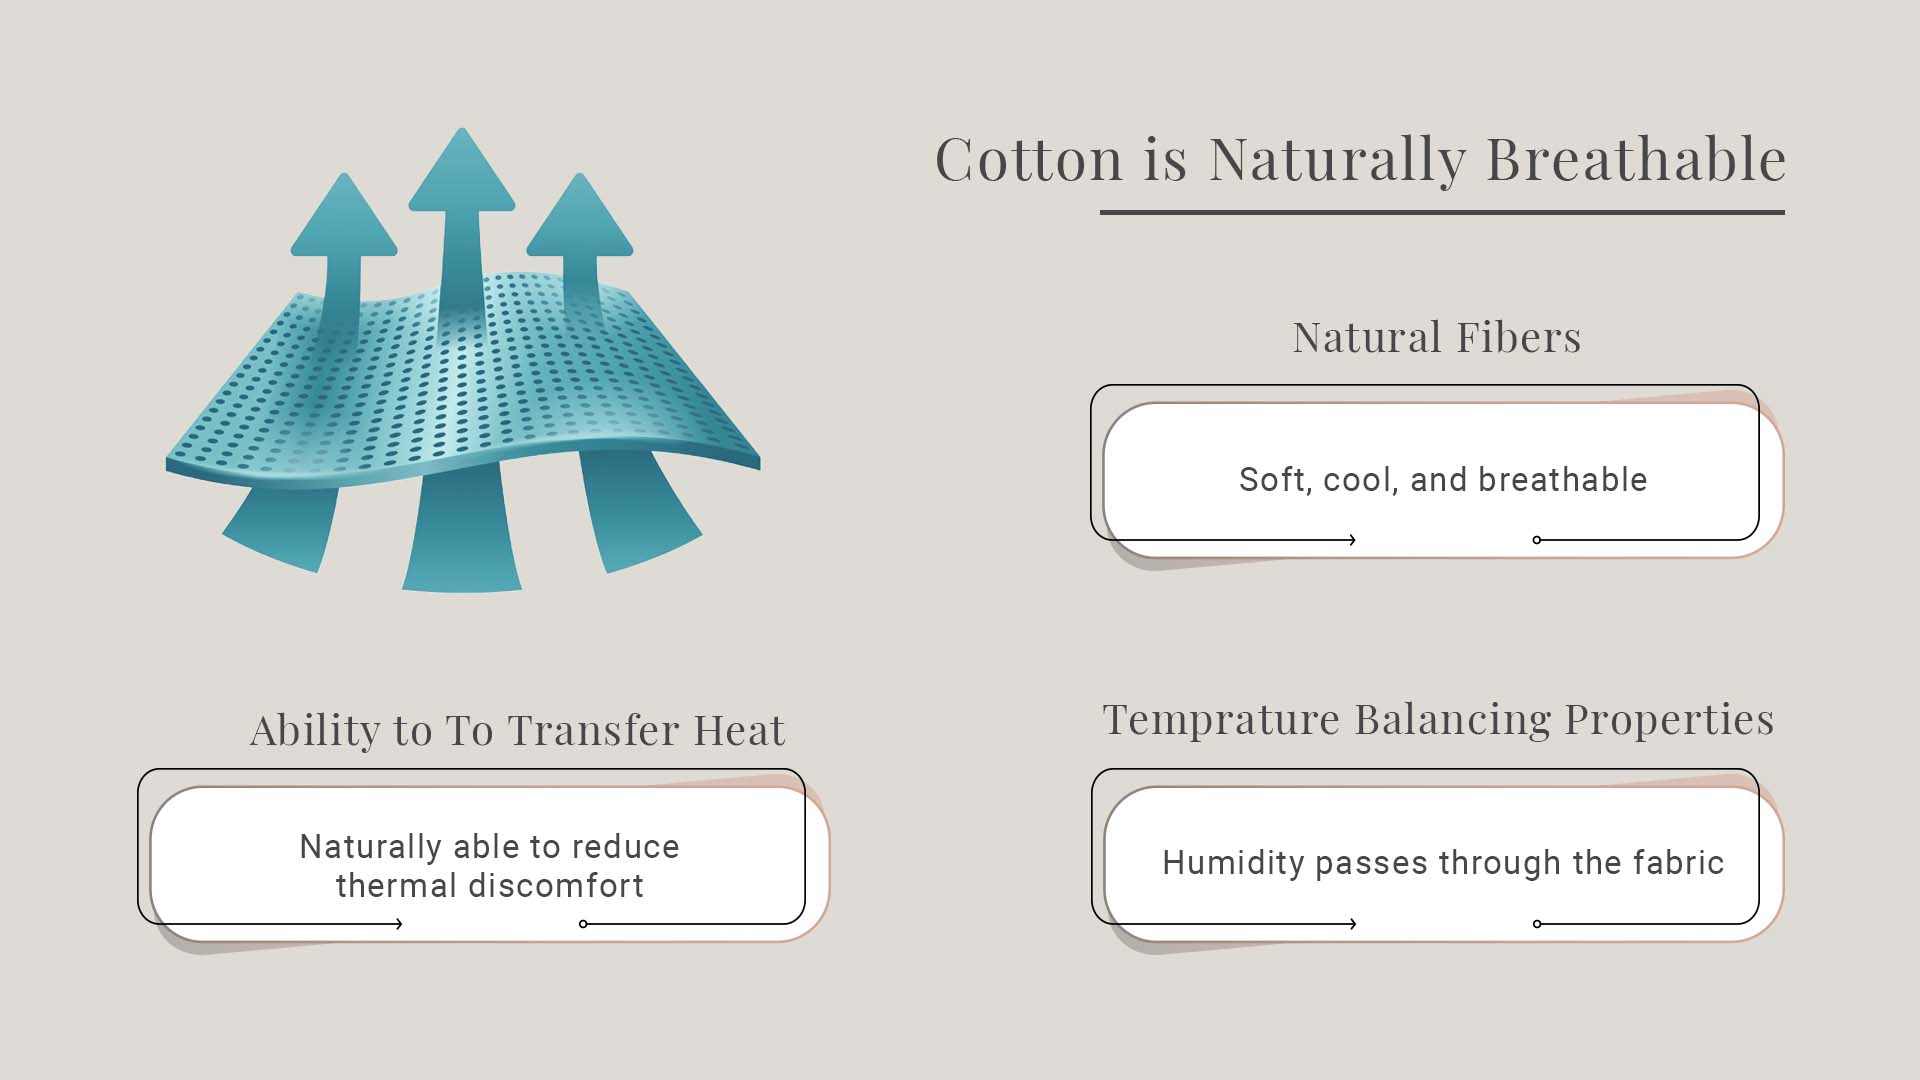 Cotton is Naturally Breathable